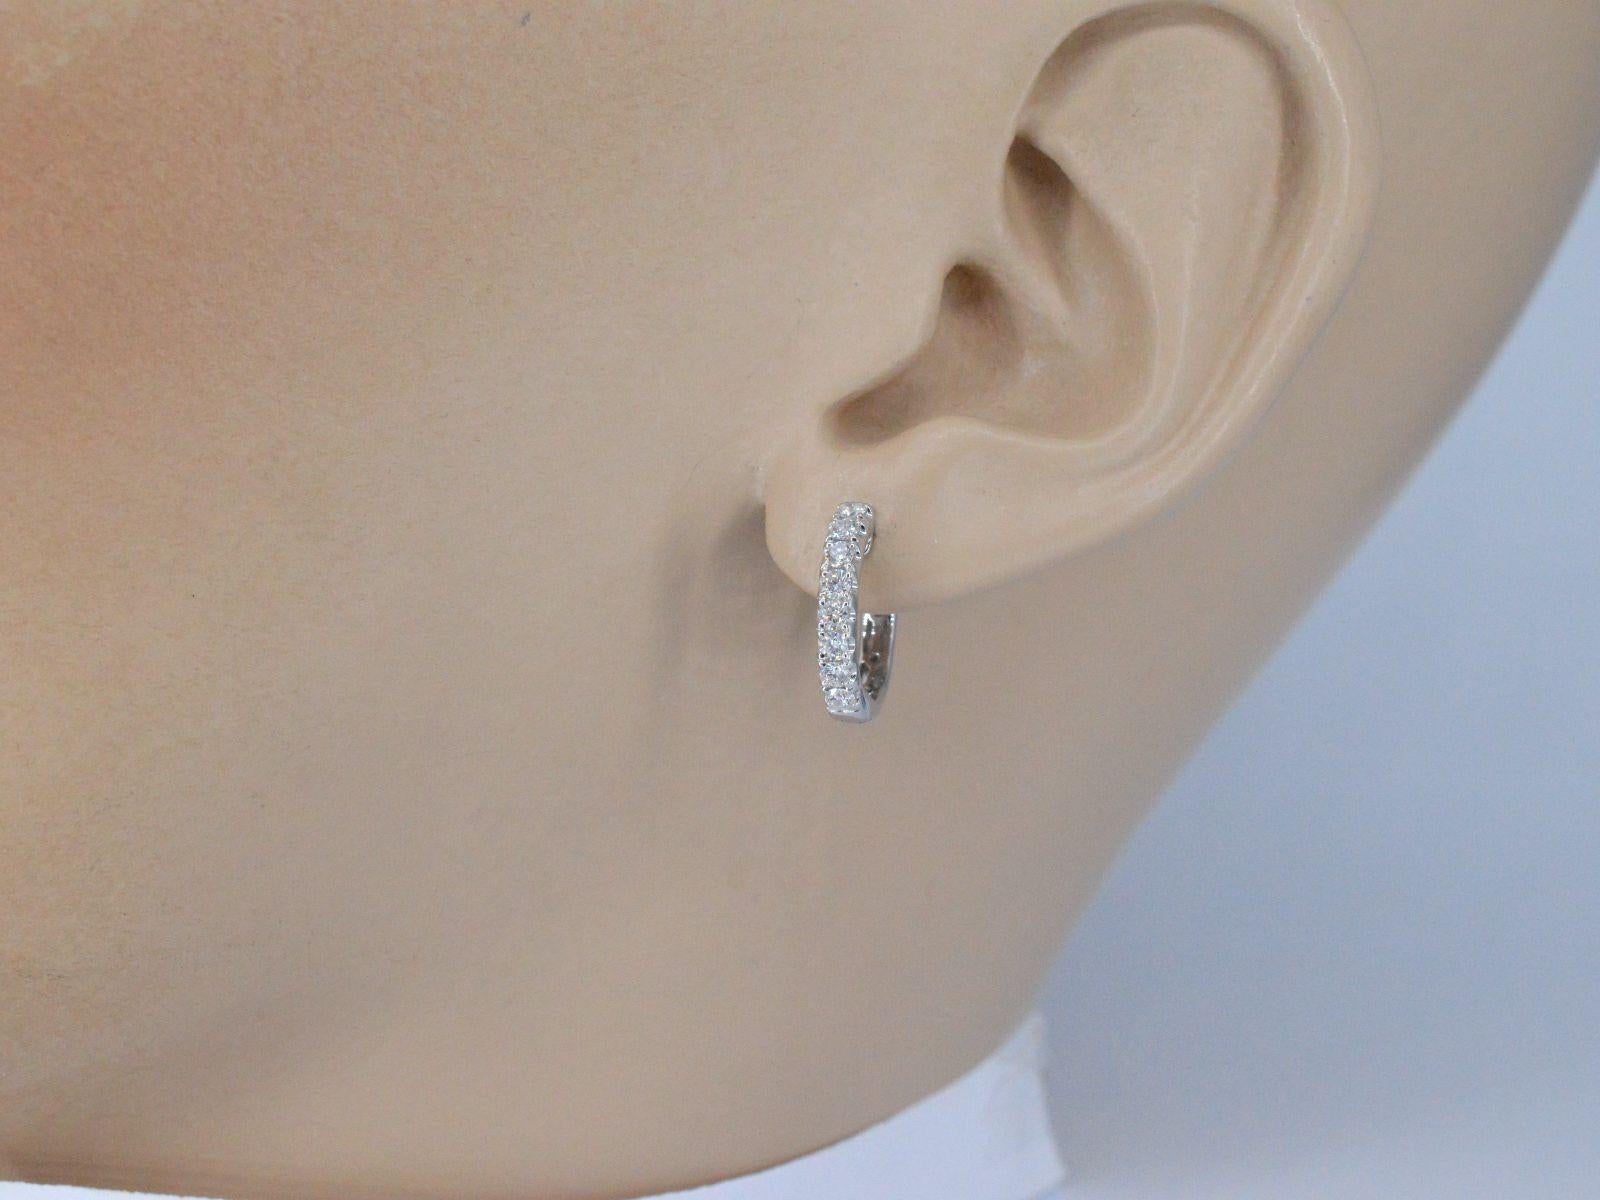 Introducing our stunning white gold earrings with naturally shiny beautiful diamonds, weighing 0.60 carats. The brilliant cut diamonds boast an amazing F-G color and VS clarity, making them truly exceptional. Made from high-quality 18K gold and